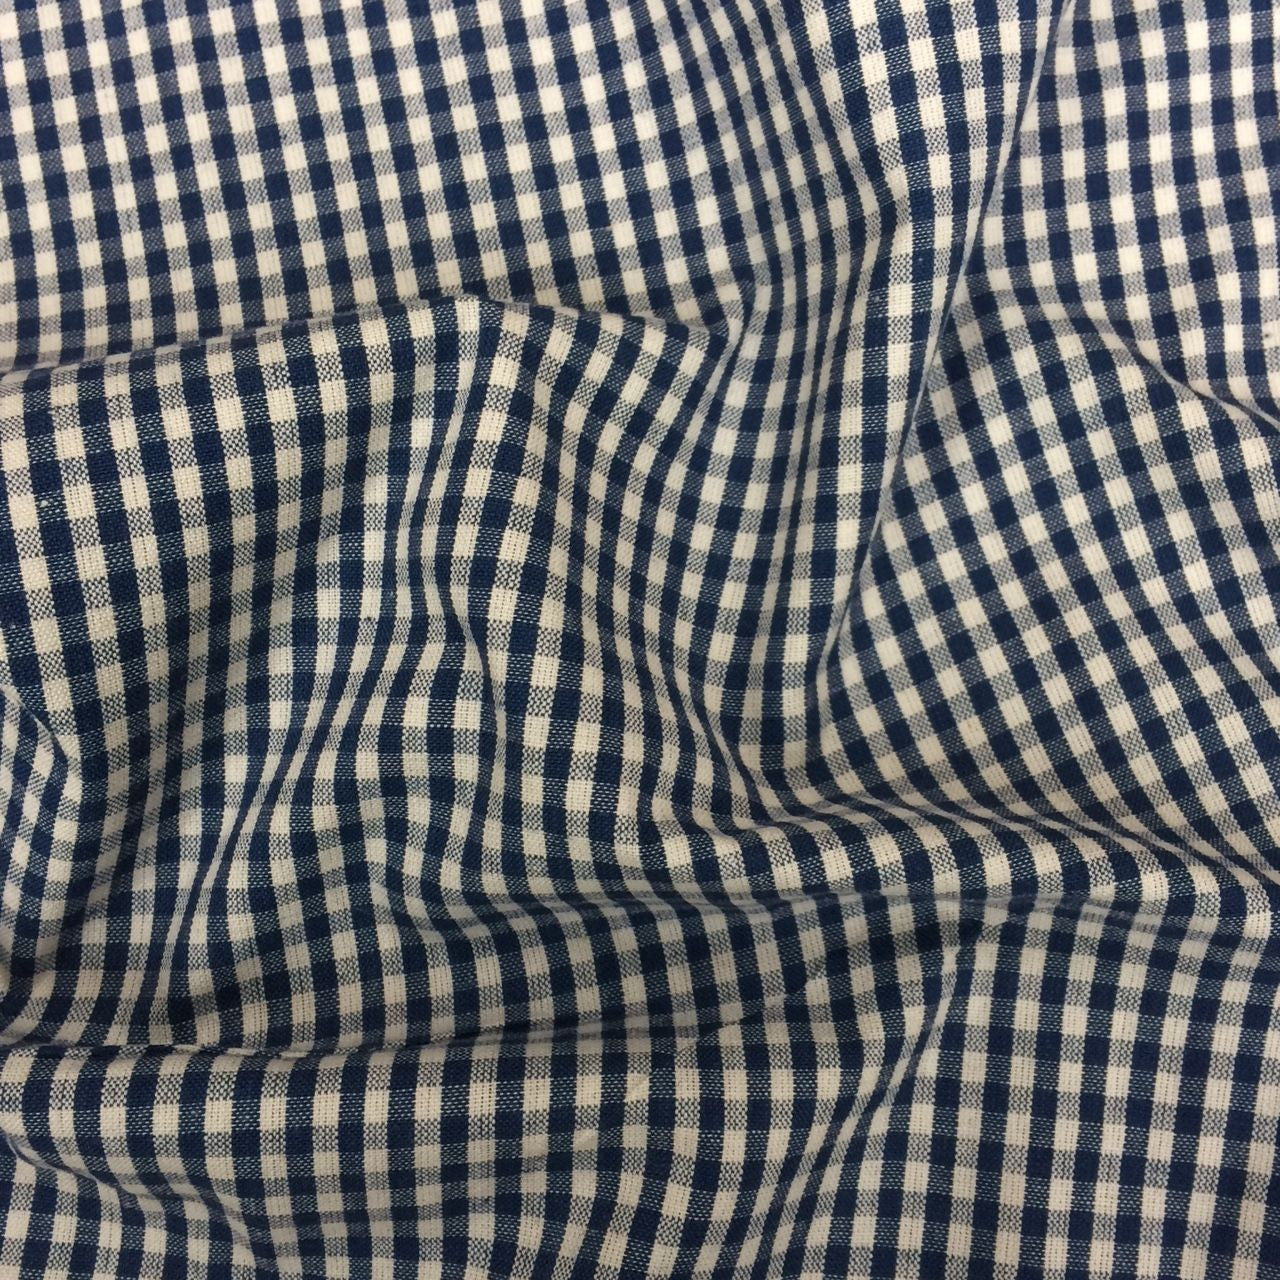 100% Organic Cotton Small Woven Gingham Check Navy